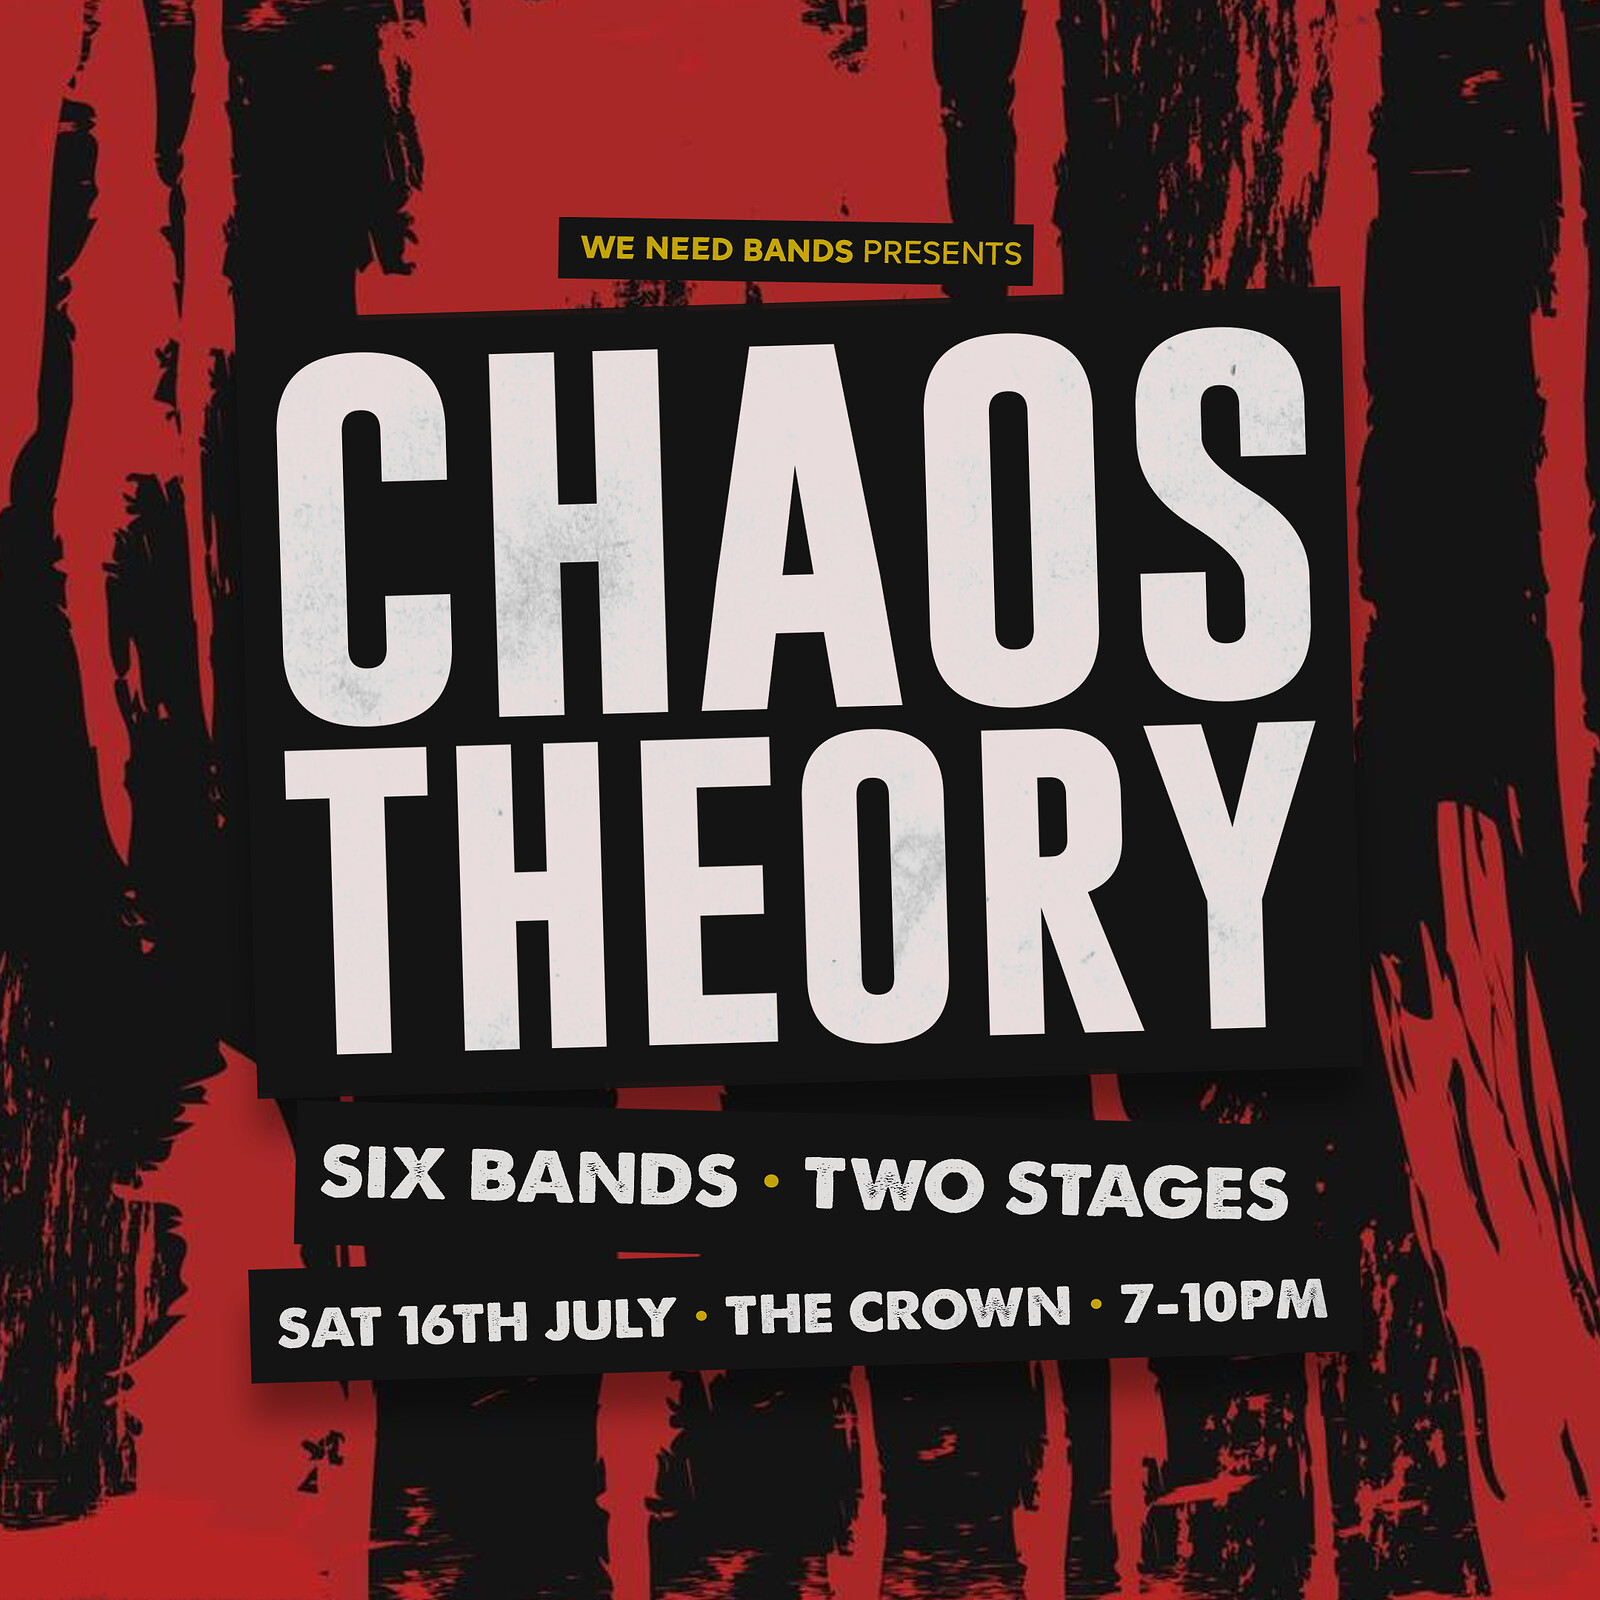 CHAOS THEORY | Six Bands, Two Stages at The Crown